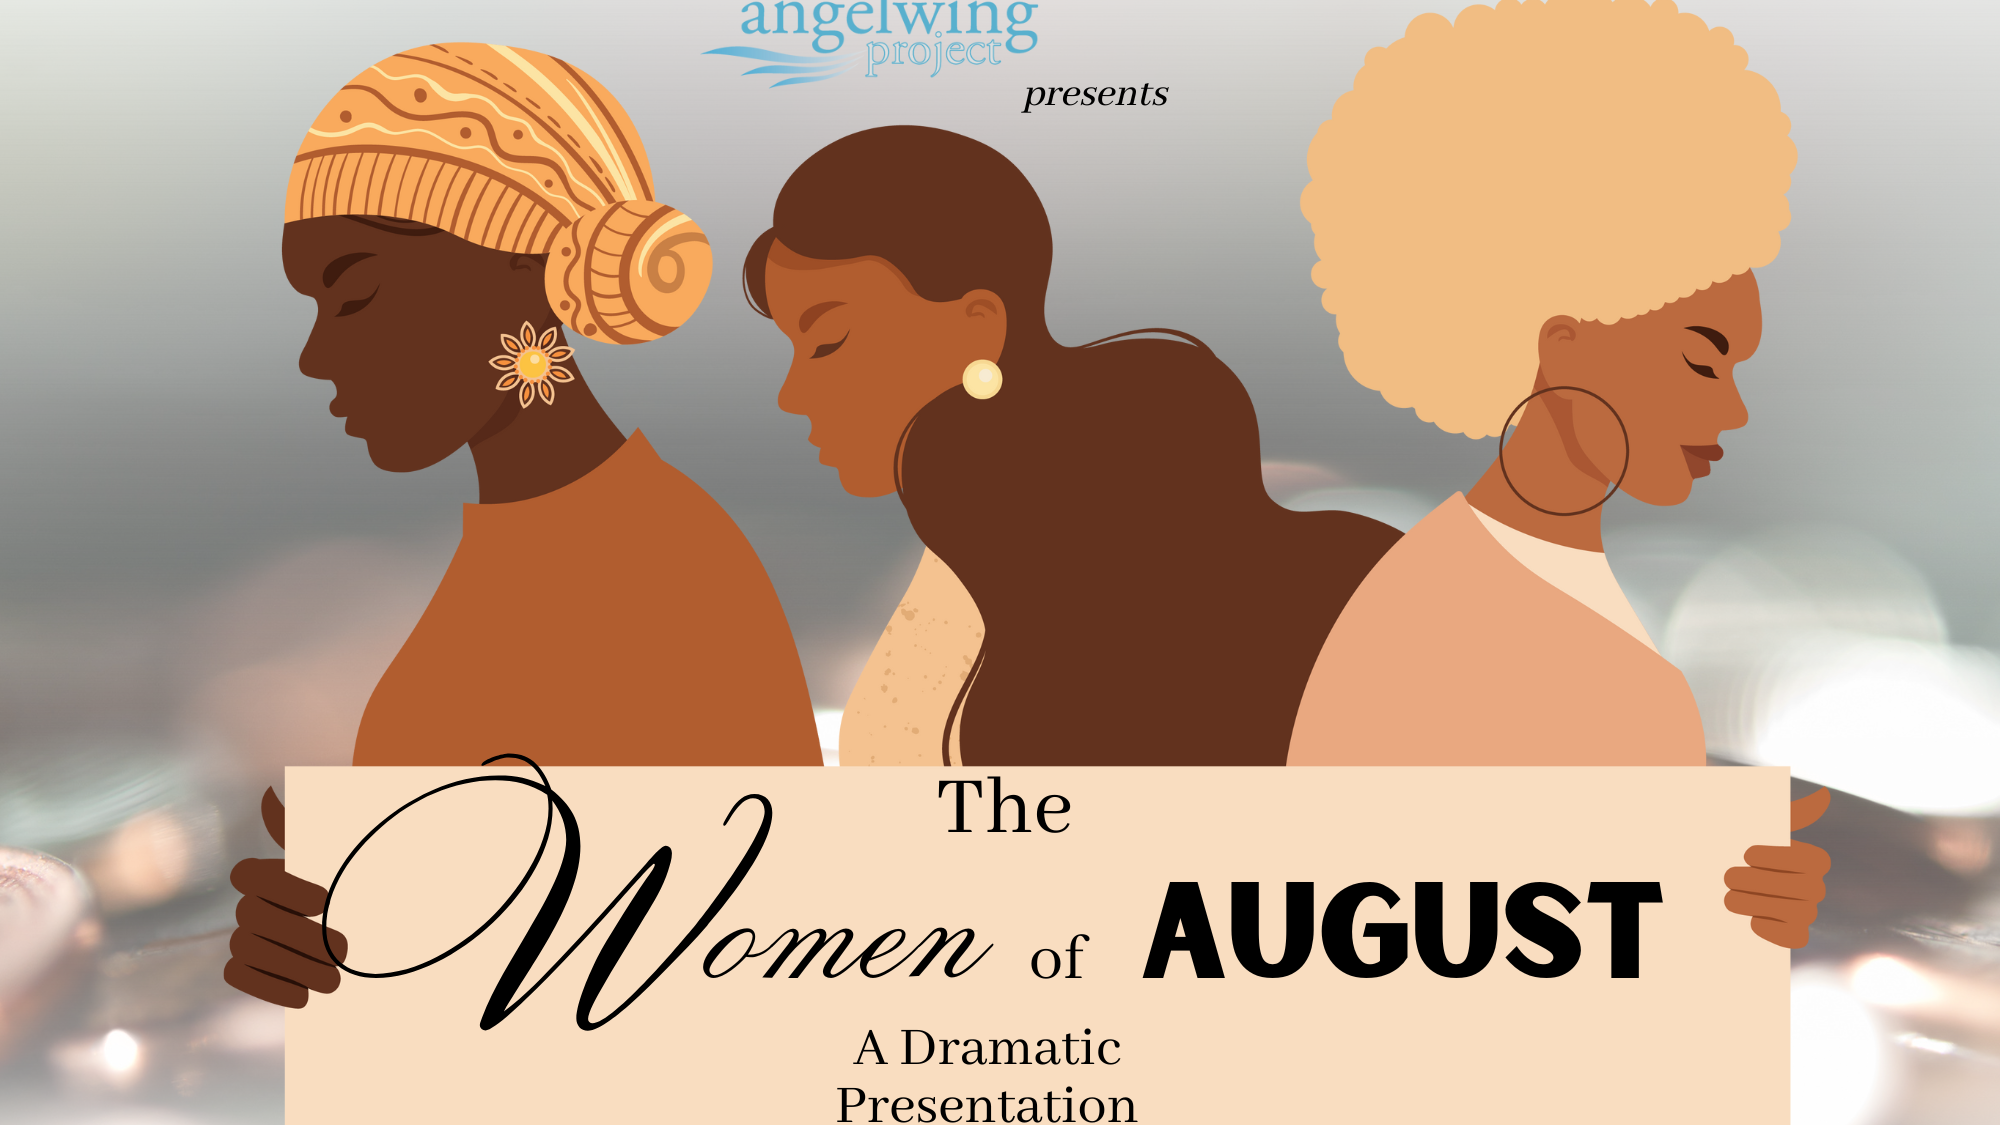 Photo for The Women of August on ViewStub